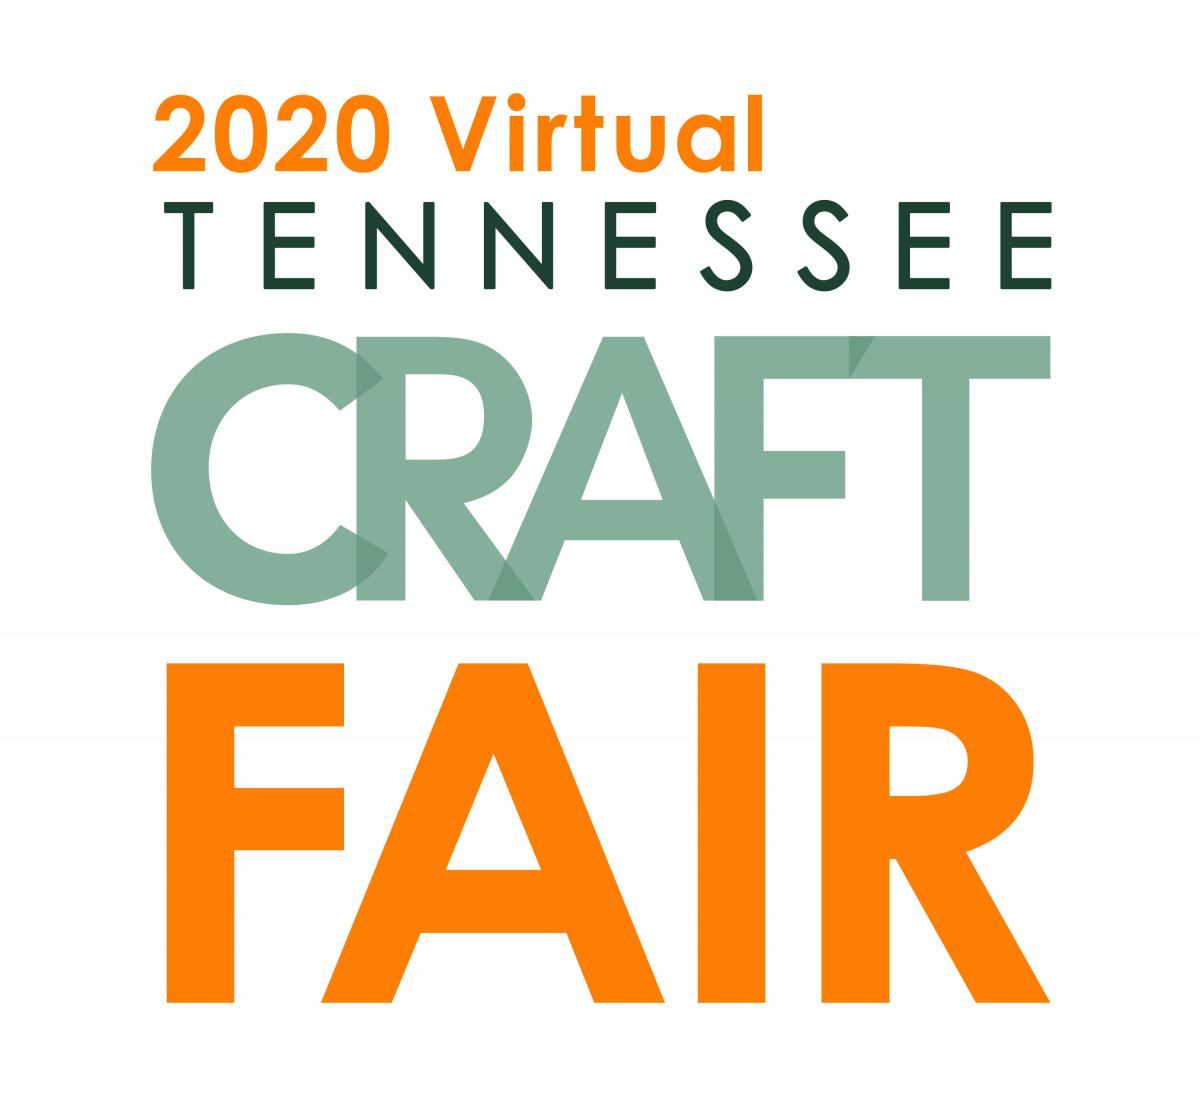 2020 Virtual Tennessee Craft Fair cover image